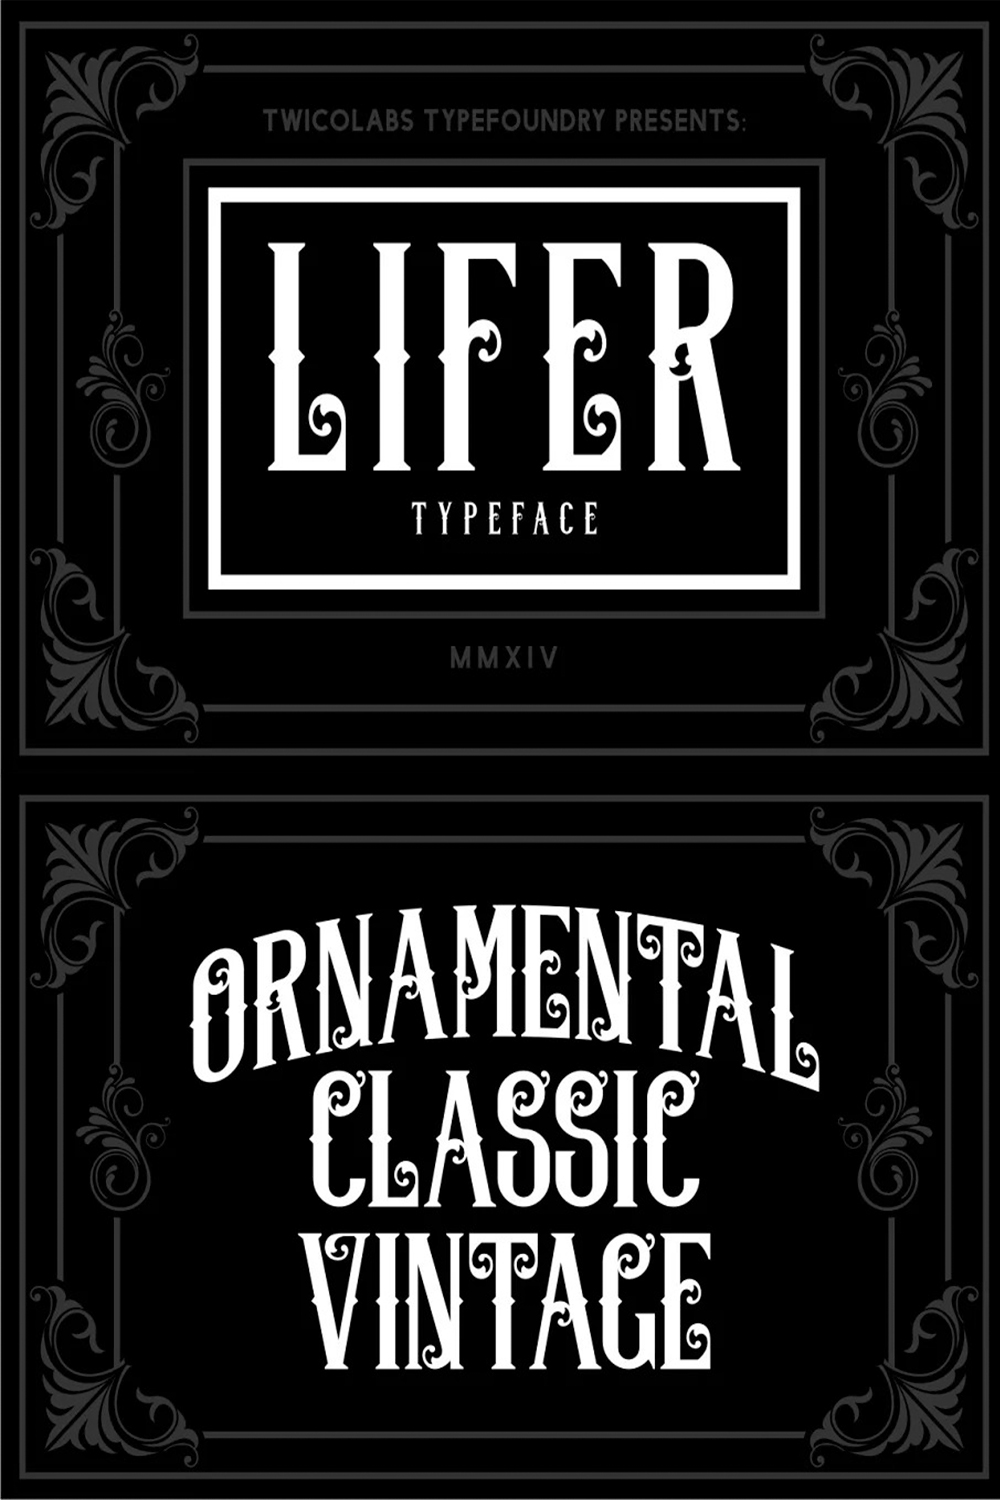 Images with text showing the elegant Lifer font.